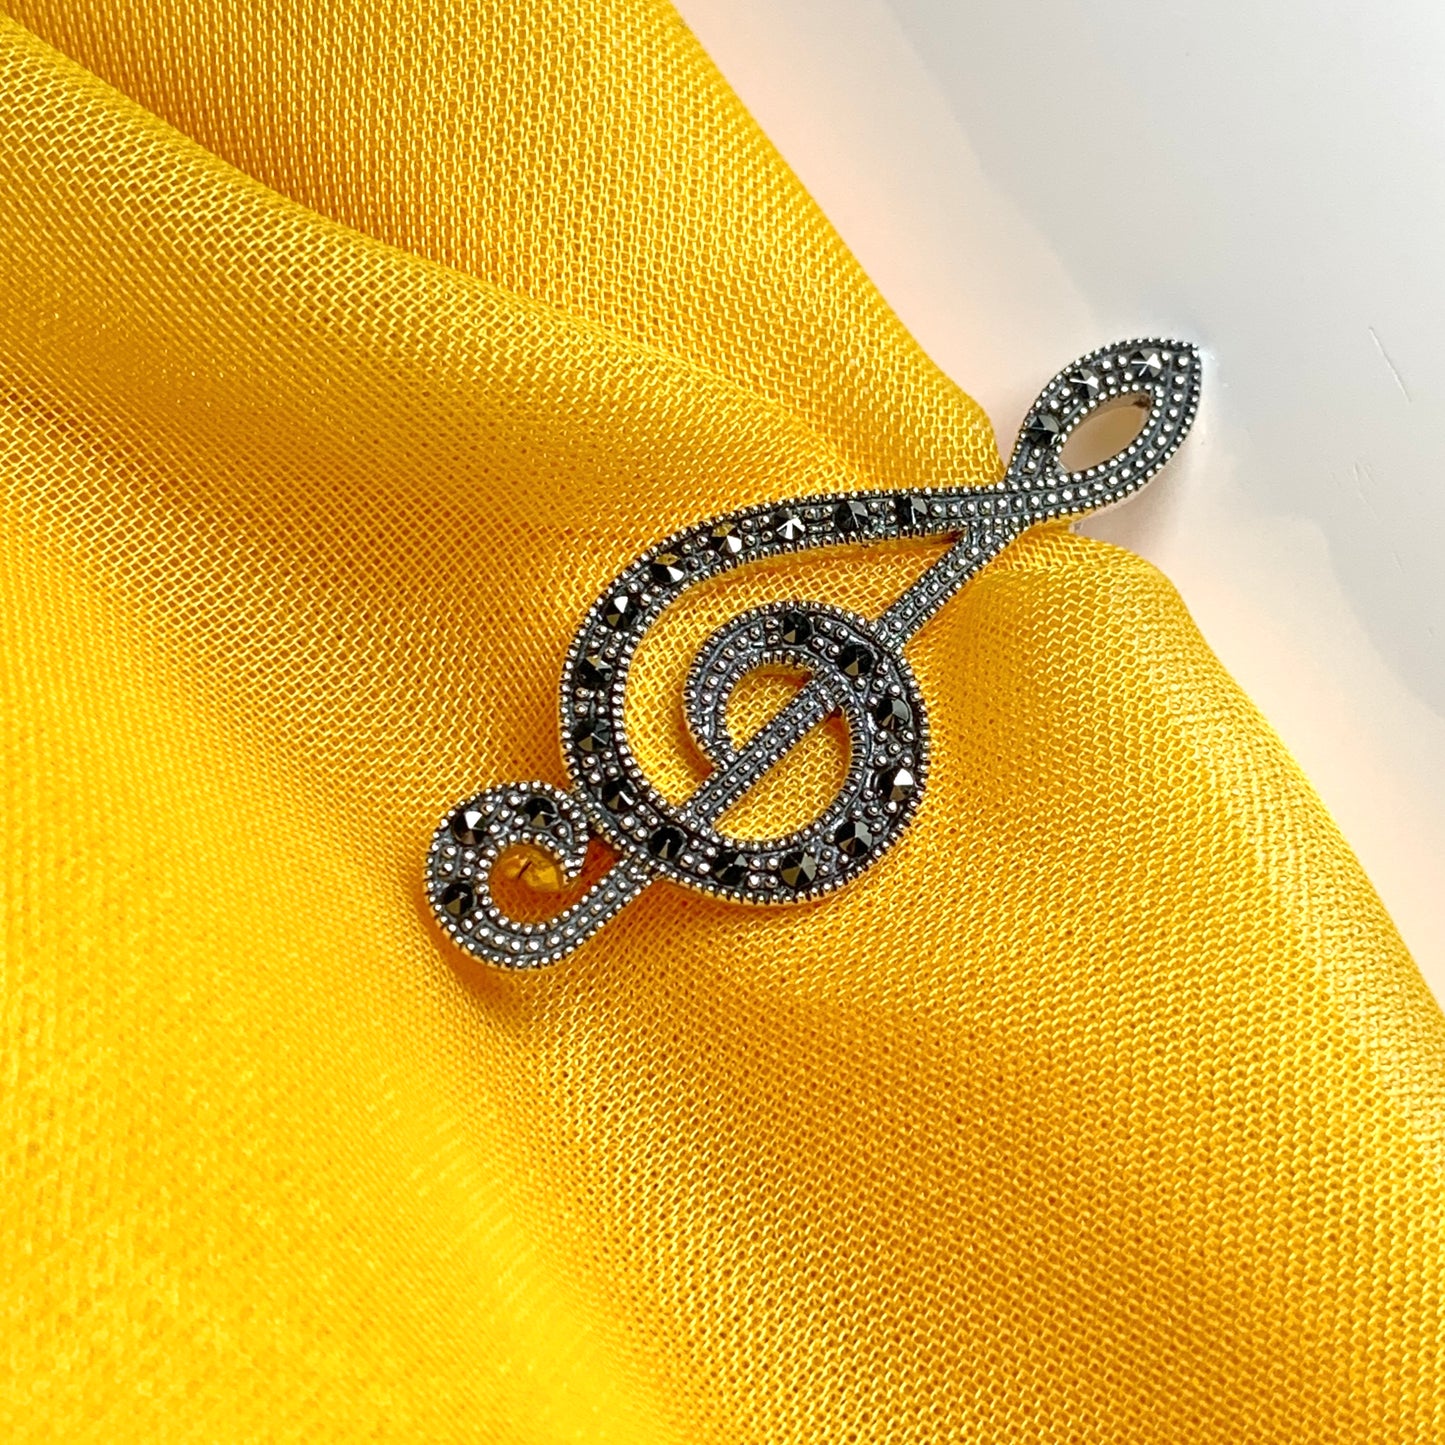 Treble clef brooch set with marcasite stones musical note sterling silver